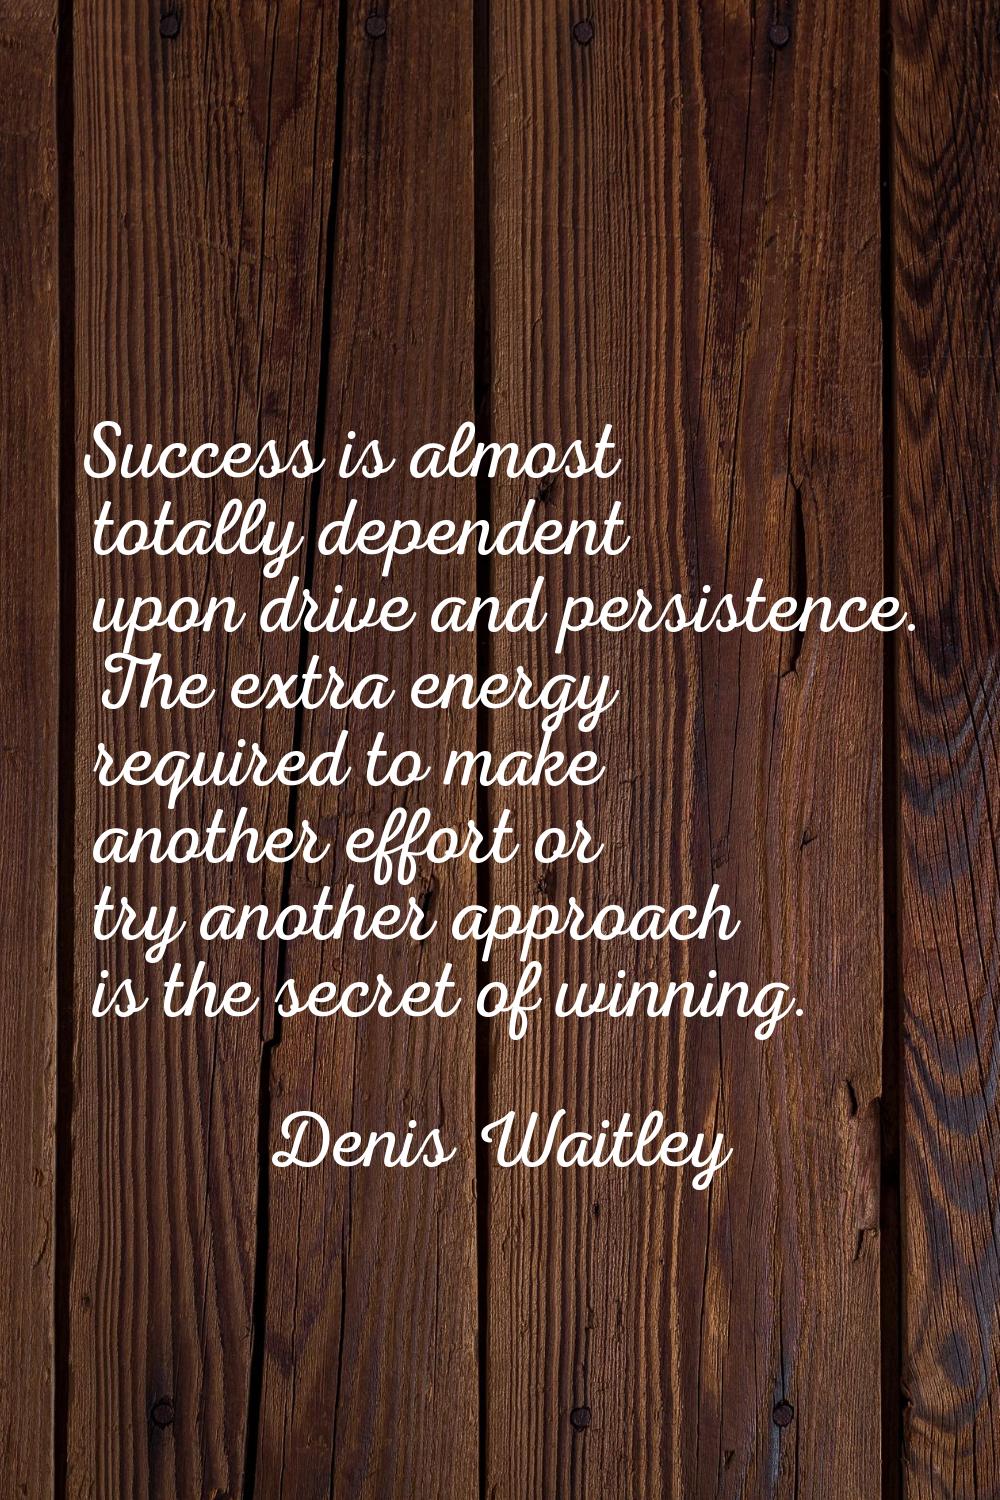 Success is almost totally dependent upon drive and persistence. The extra energy required to make a